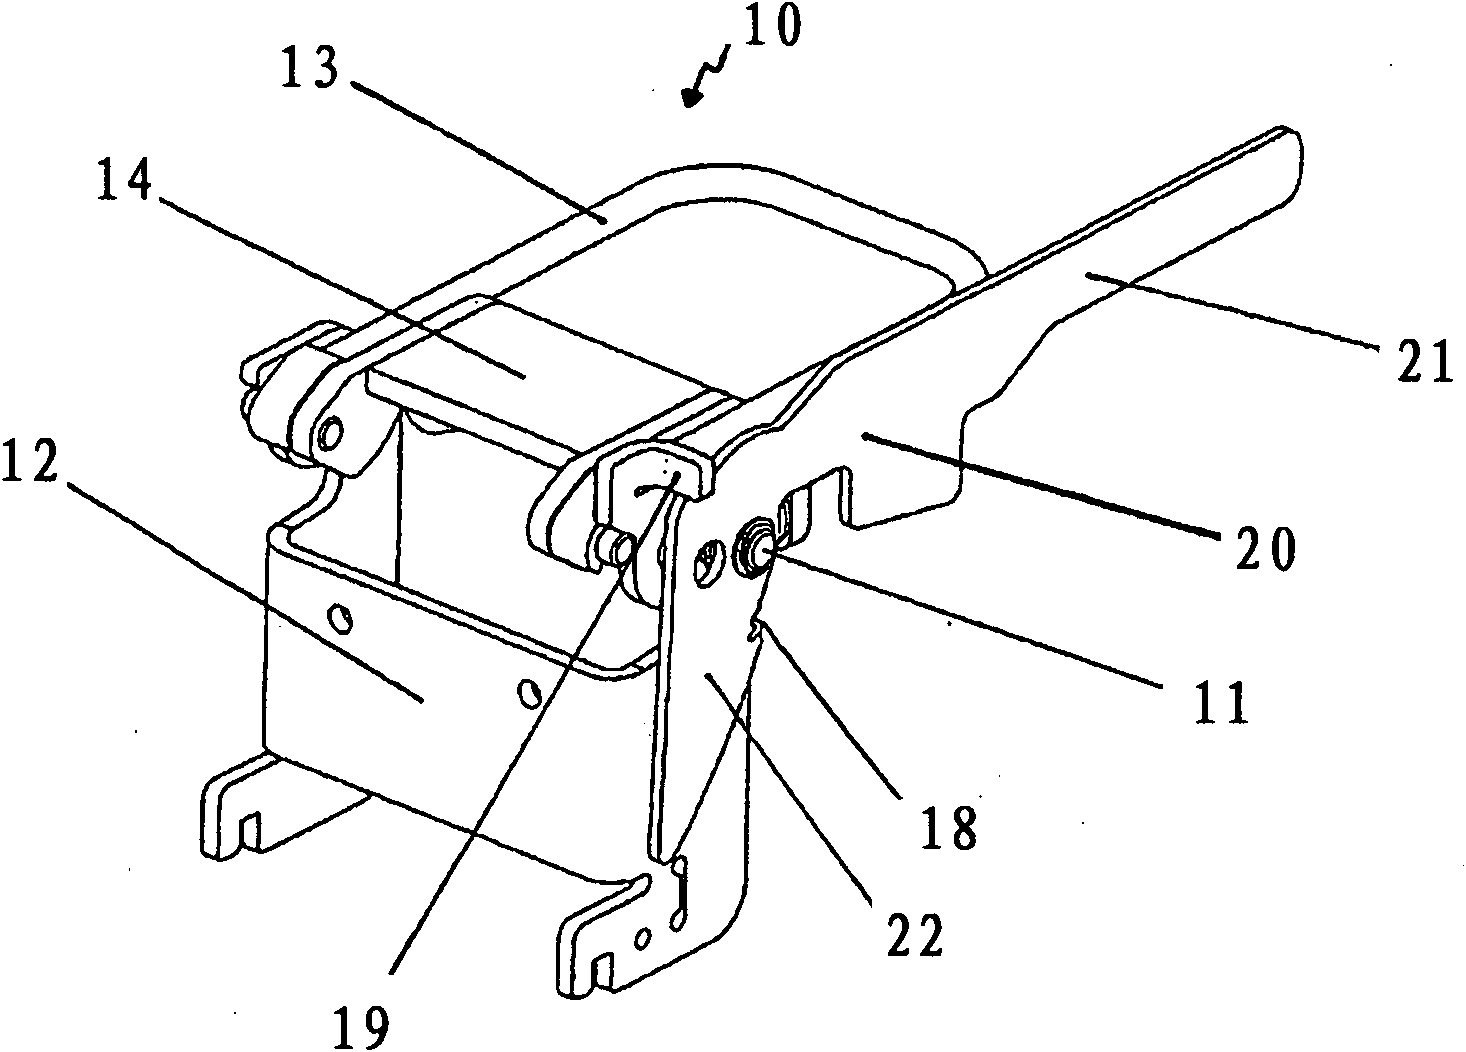 Locking device for a battery block of ground transportation vehicle